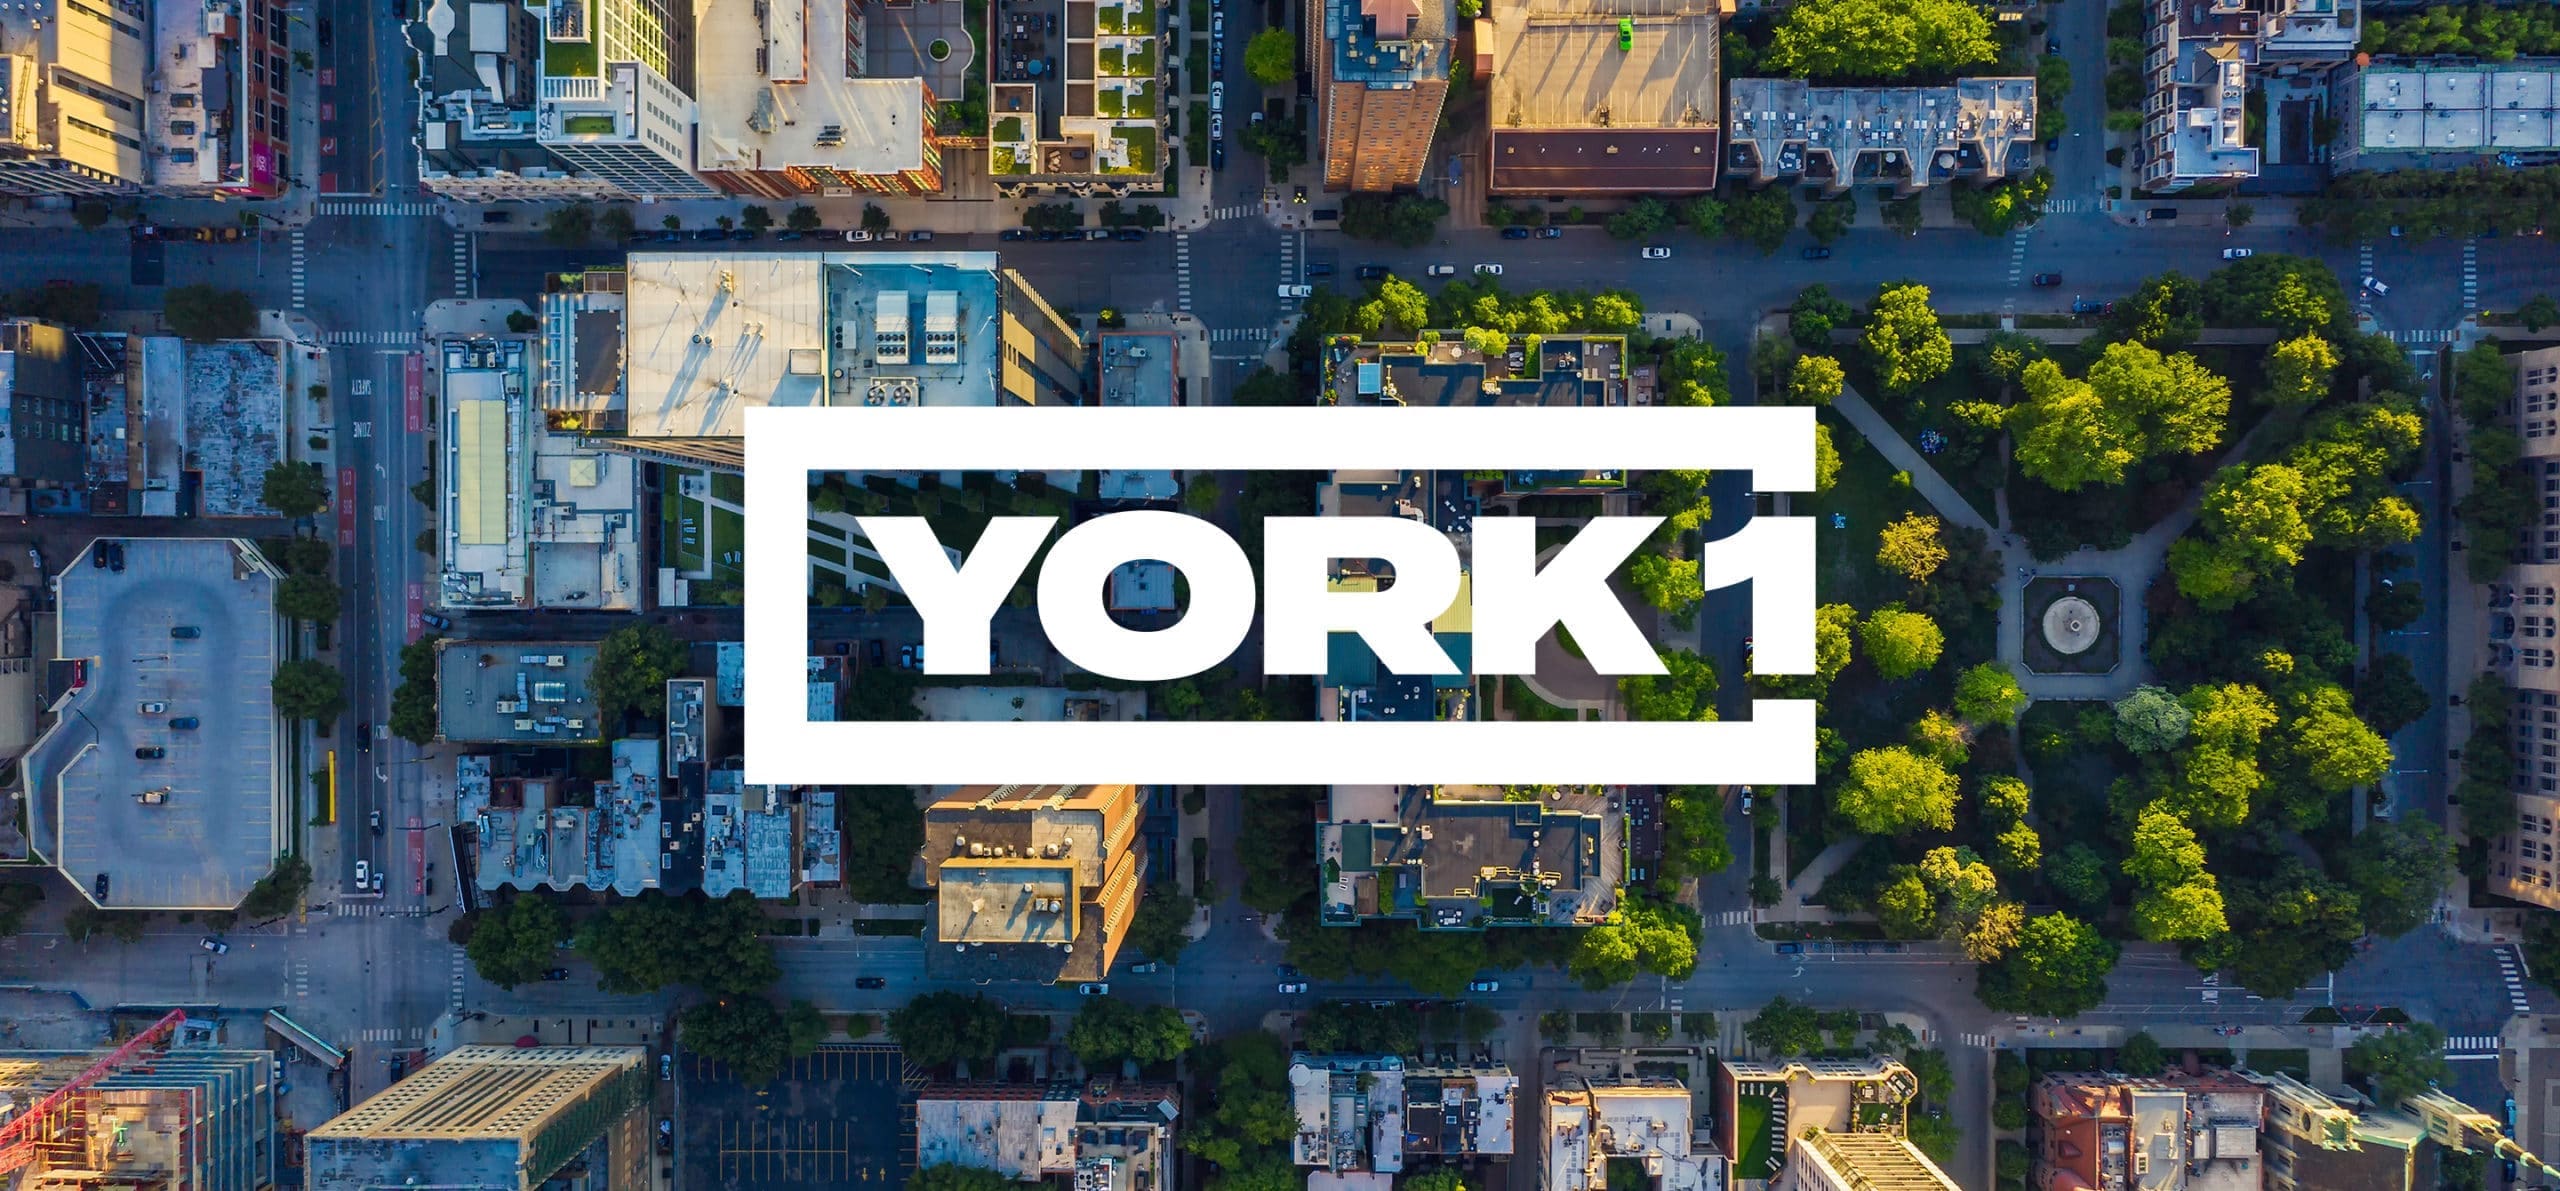 Bird's-eye view of cityscape. Buildings, busy streets, trees, and a park. White York1 logo in the centre.